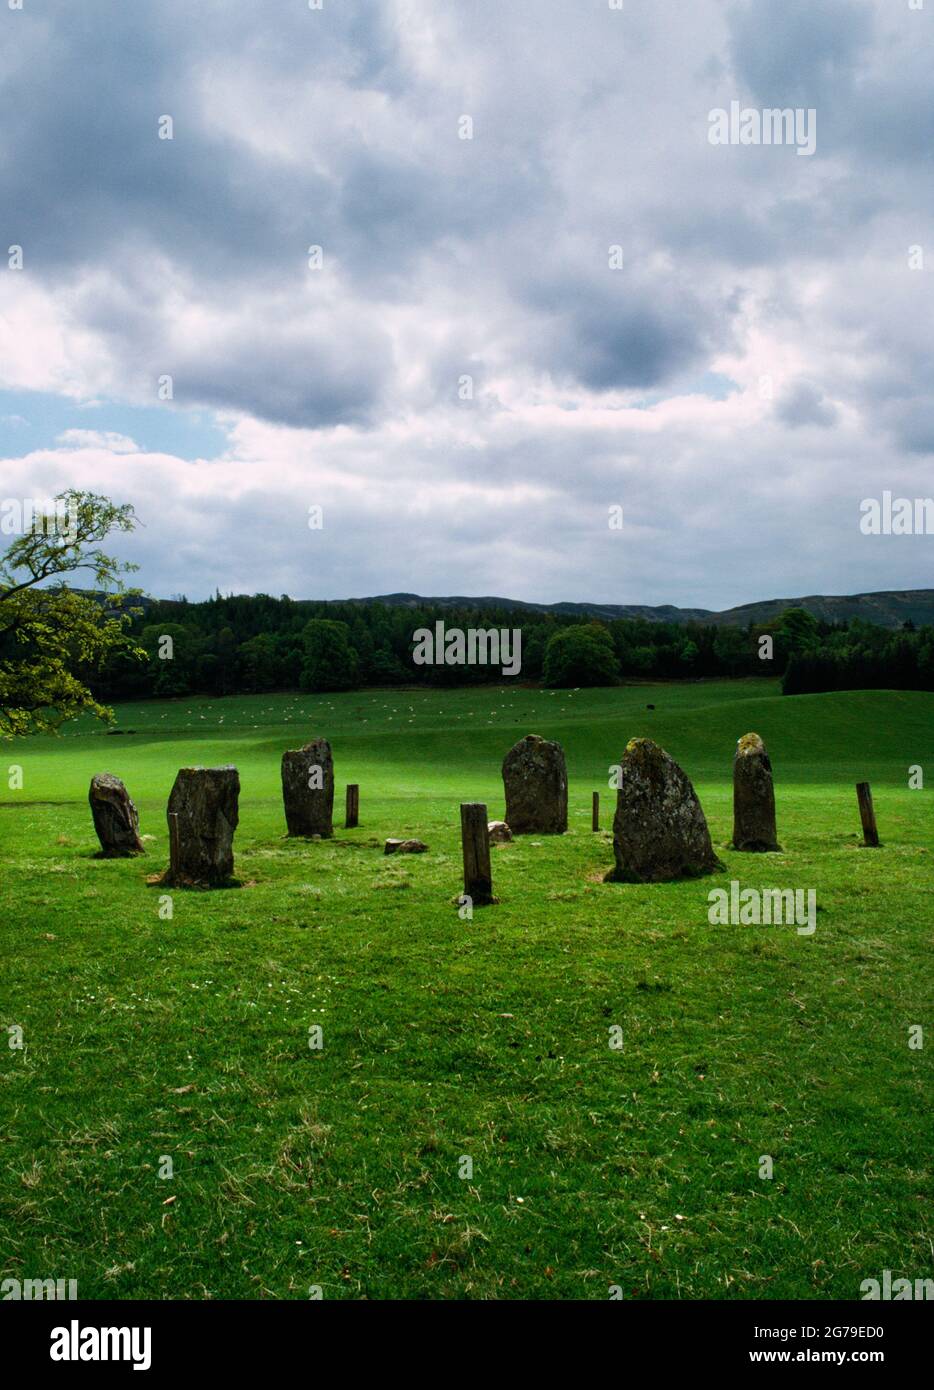 Looking SSE at the six stones of Kinnell Bronze Age stone circle situated in parkland SW of Kinnell House, Killin, Stirling, Scotland, UK. Stock Photo